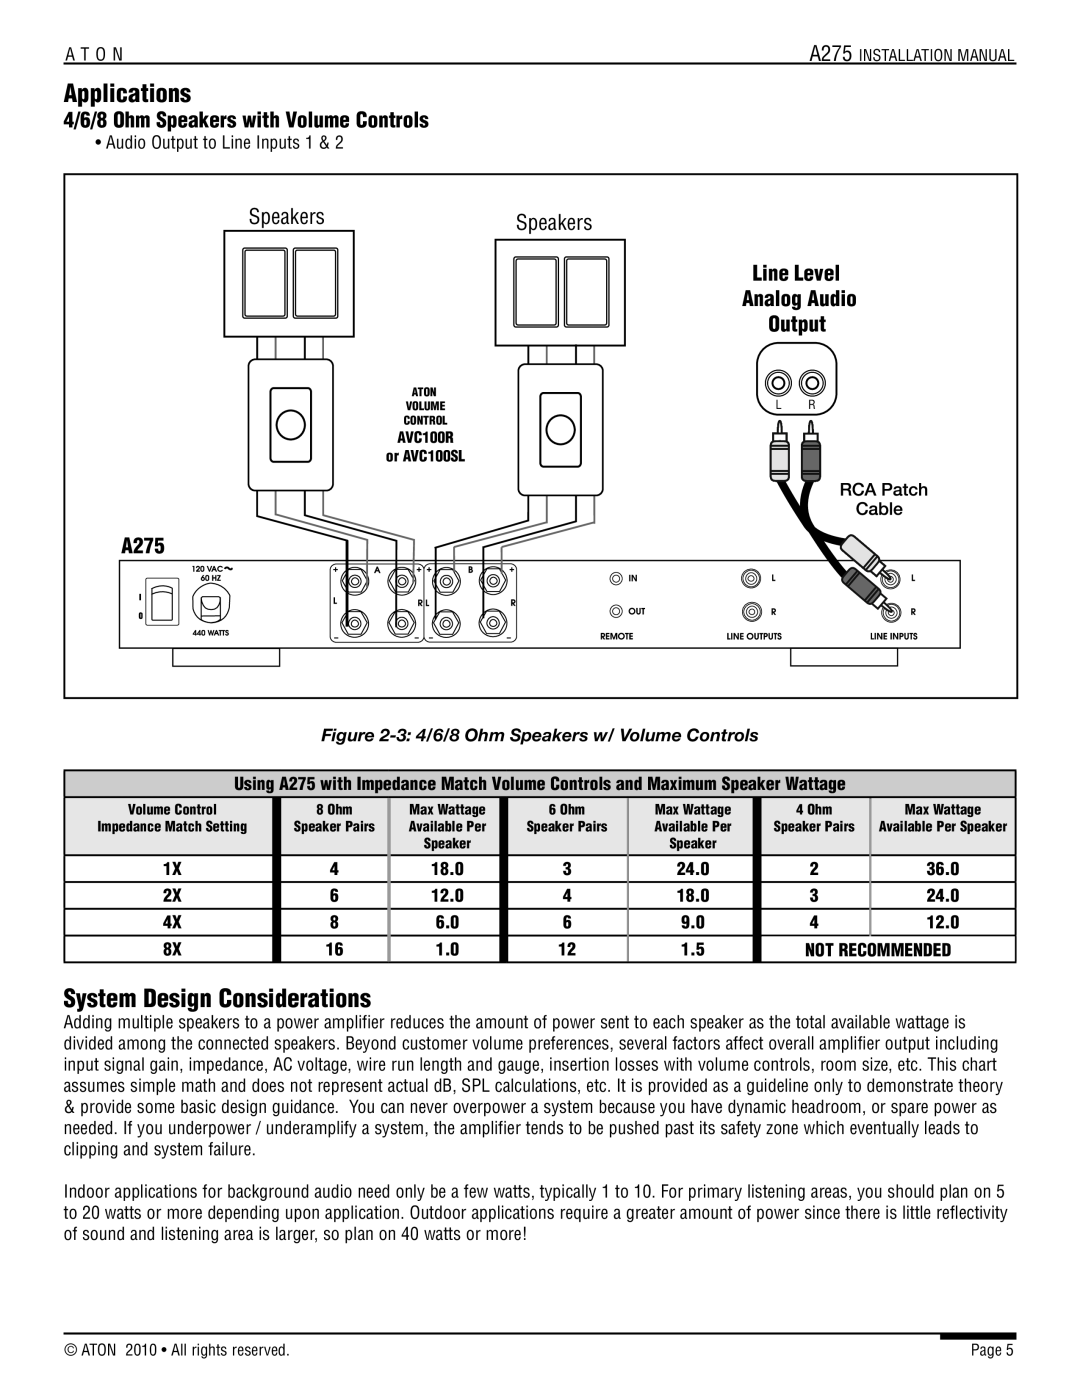 ATON A275 installation manual Applications, System Design Considerations, 4/6/8 Ohm Speakers with Volume Controls, Output 